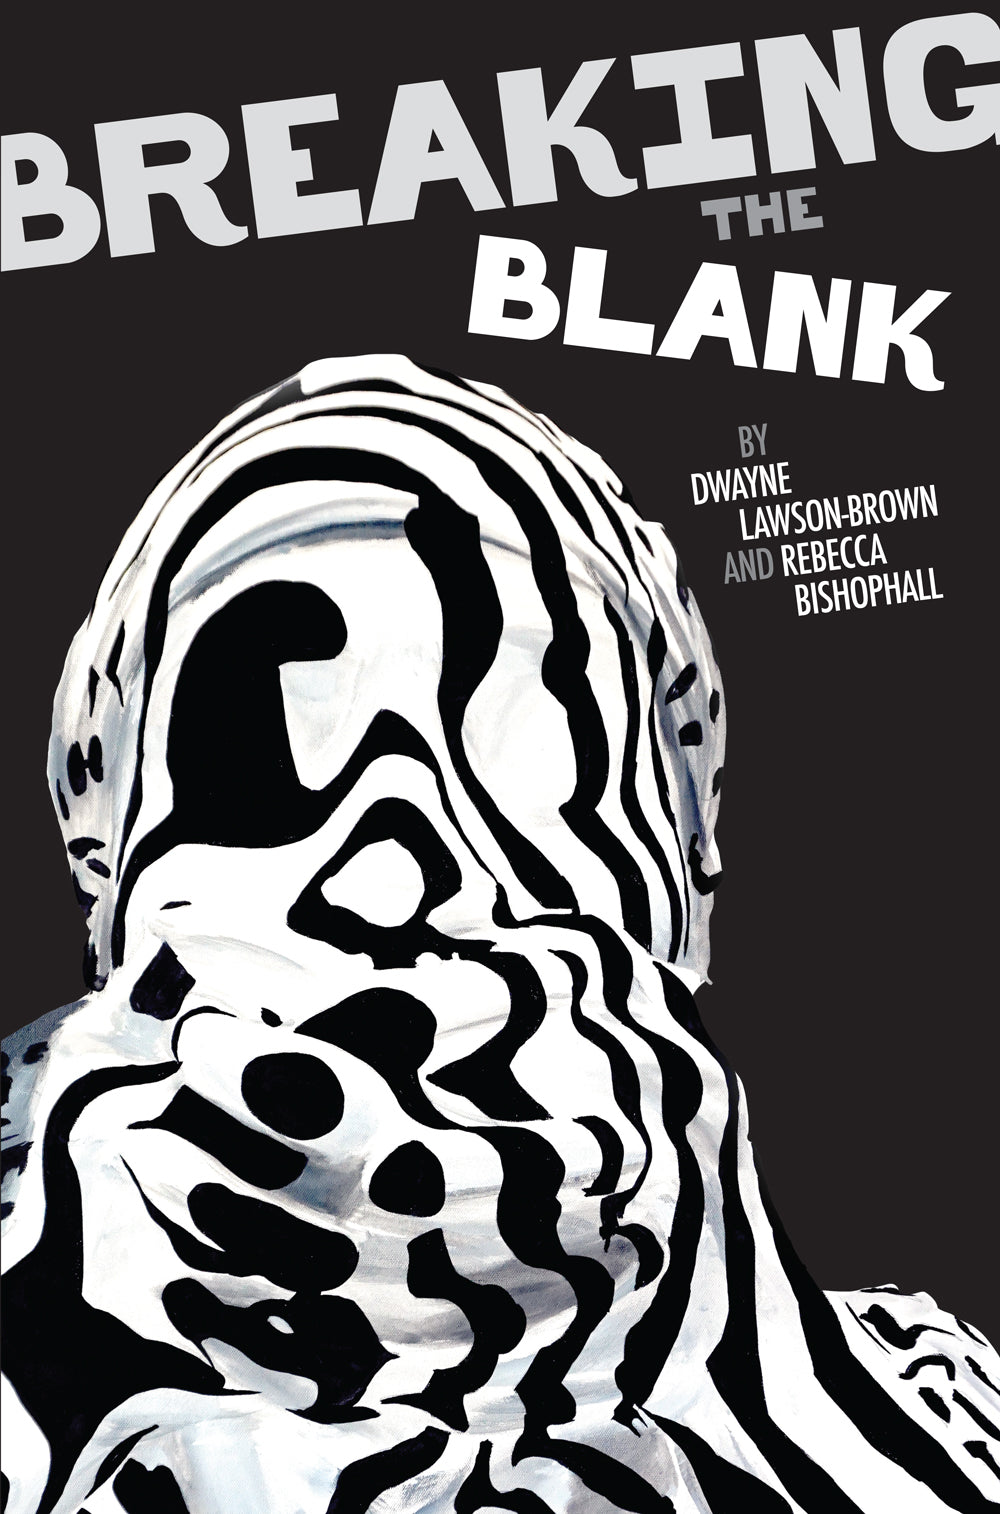 Breaking the Blank by Dwayne Lawson-Brown and Rebecca Bishophall